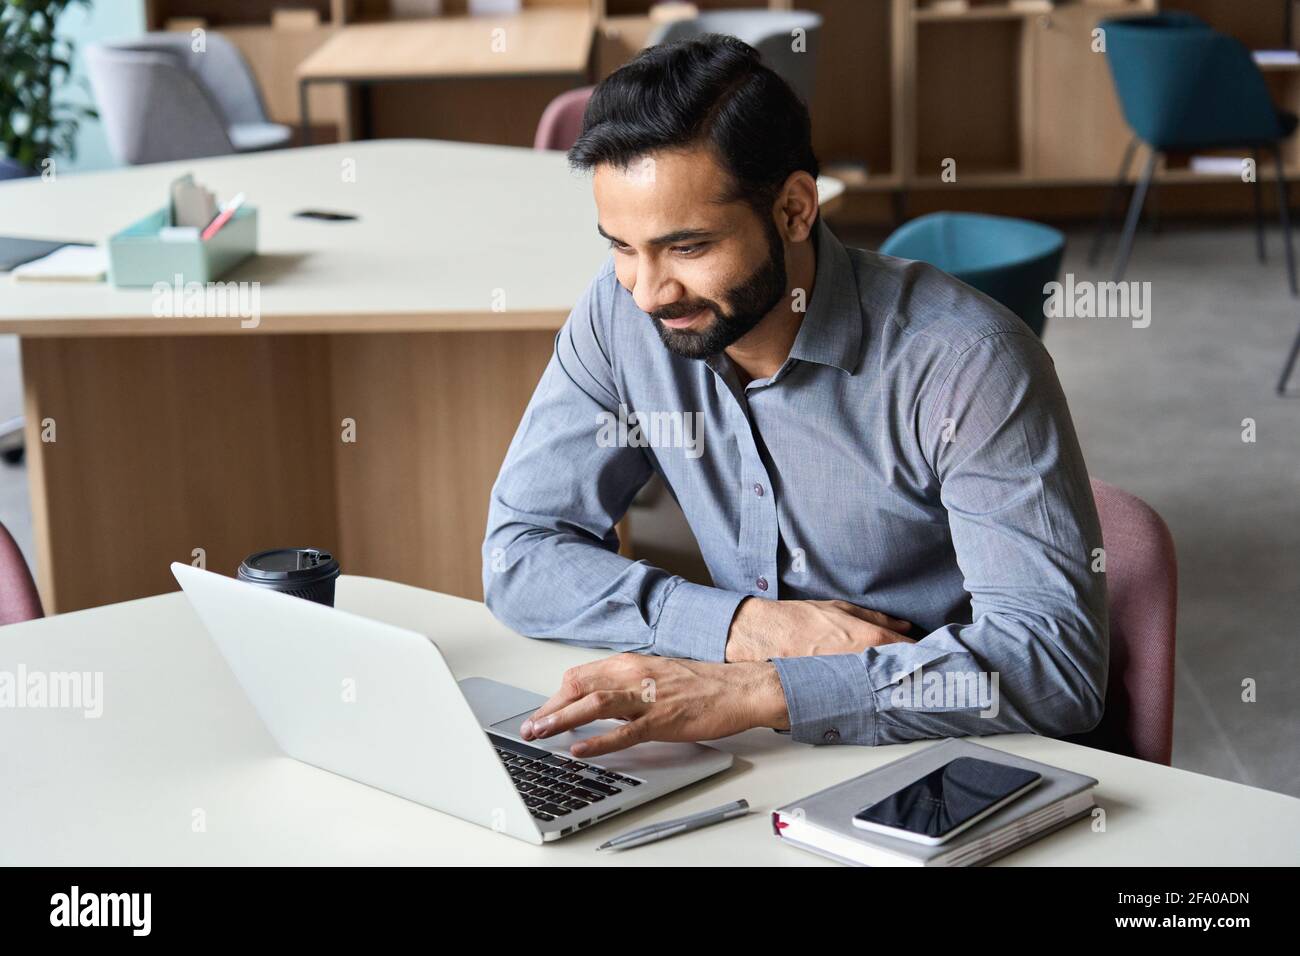 Smiling indian business man working with laptop and cellphone in coworking. Stock Photo